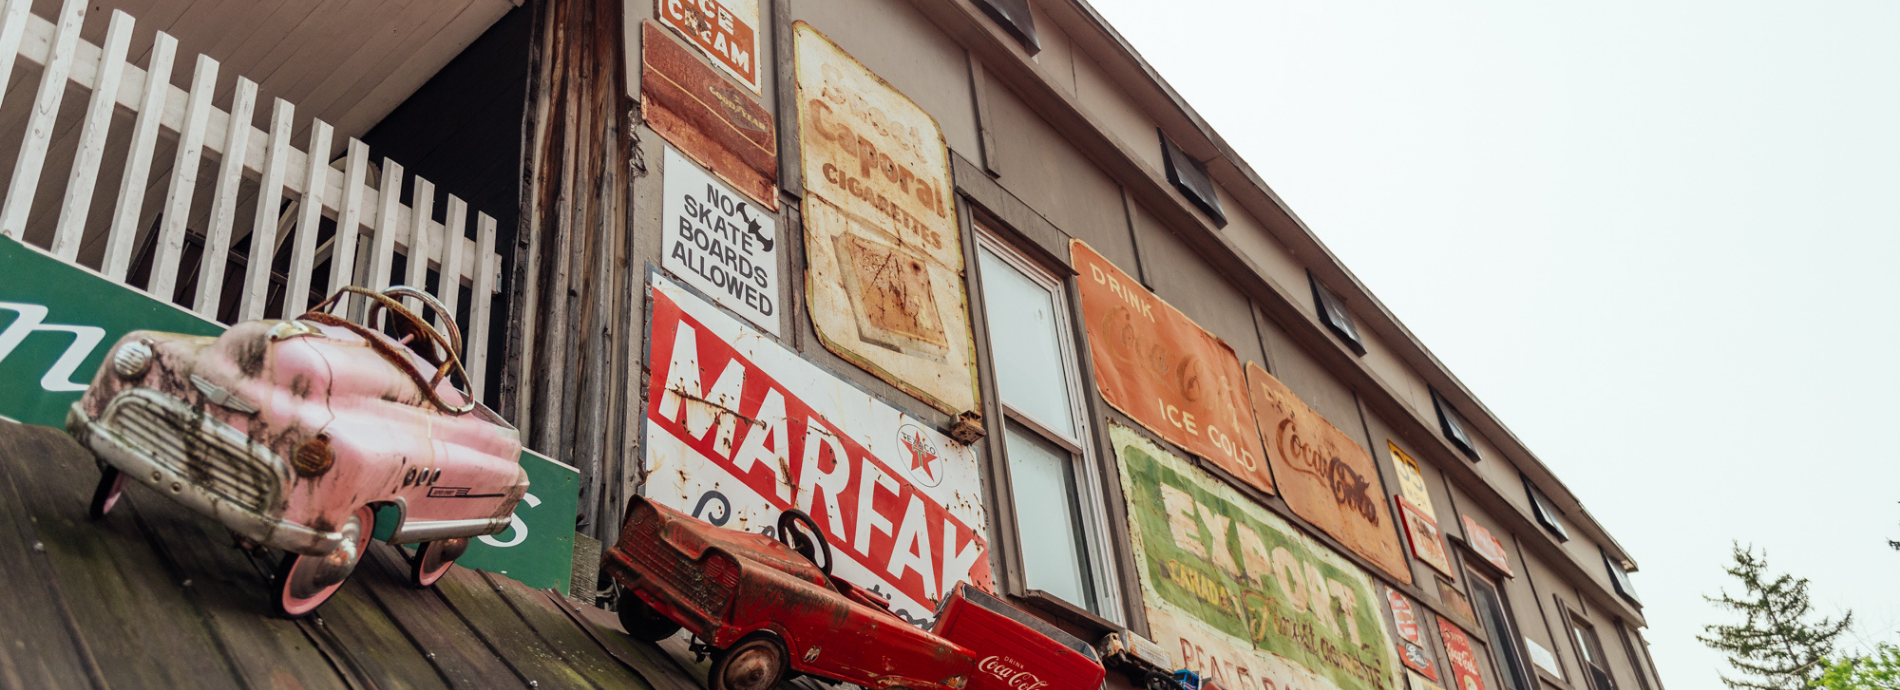 display of metal signs on the side of a building